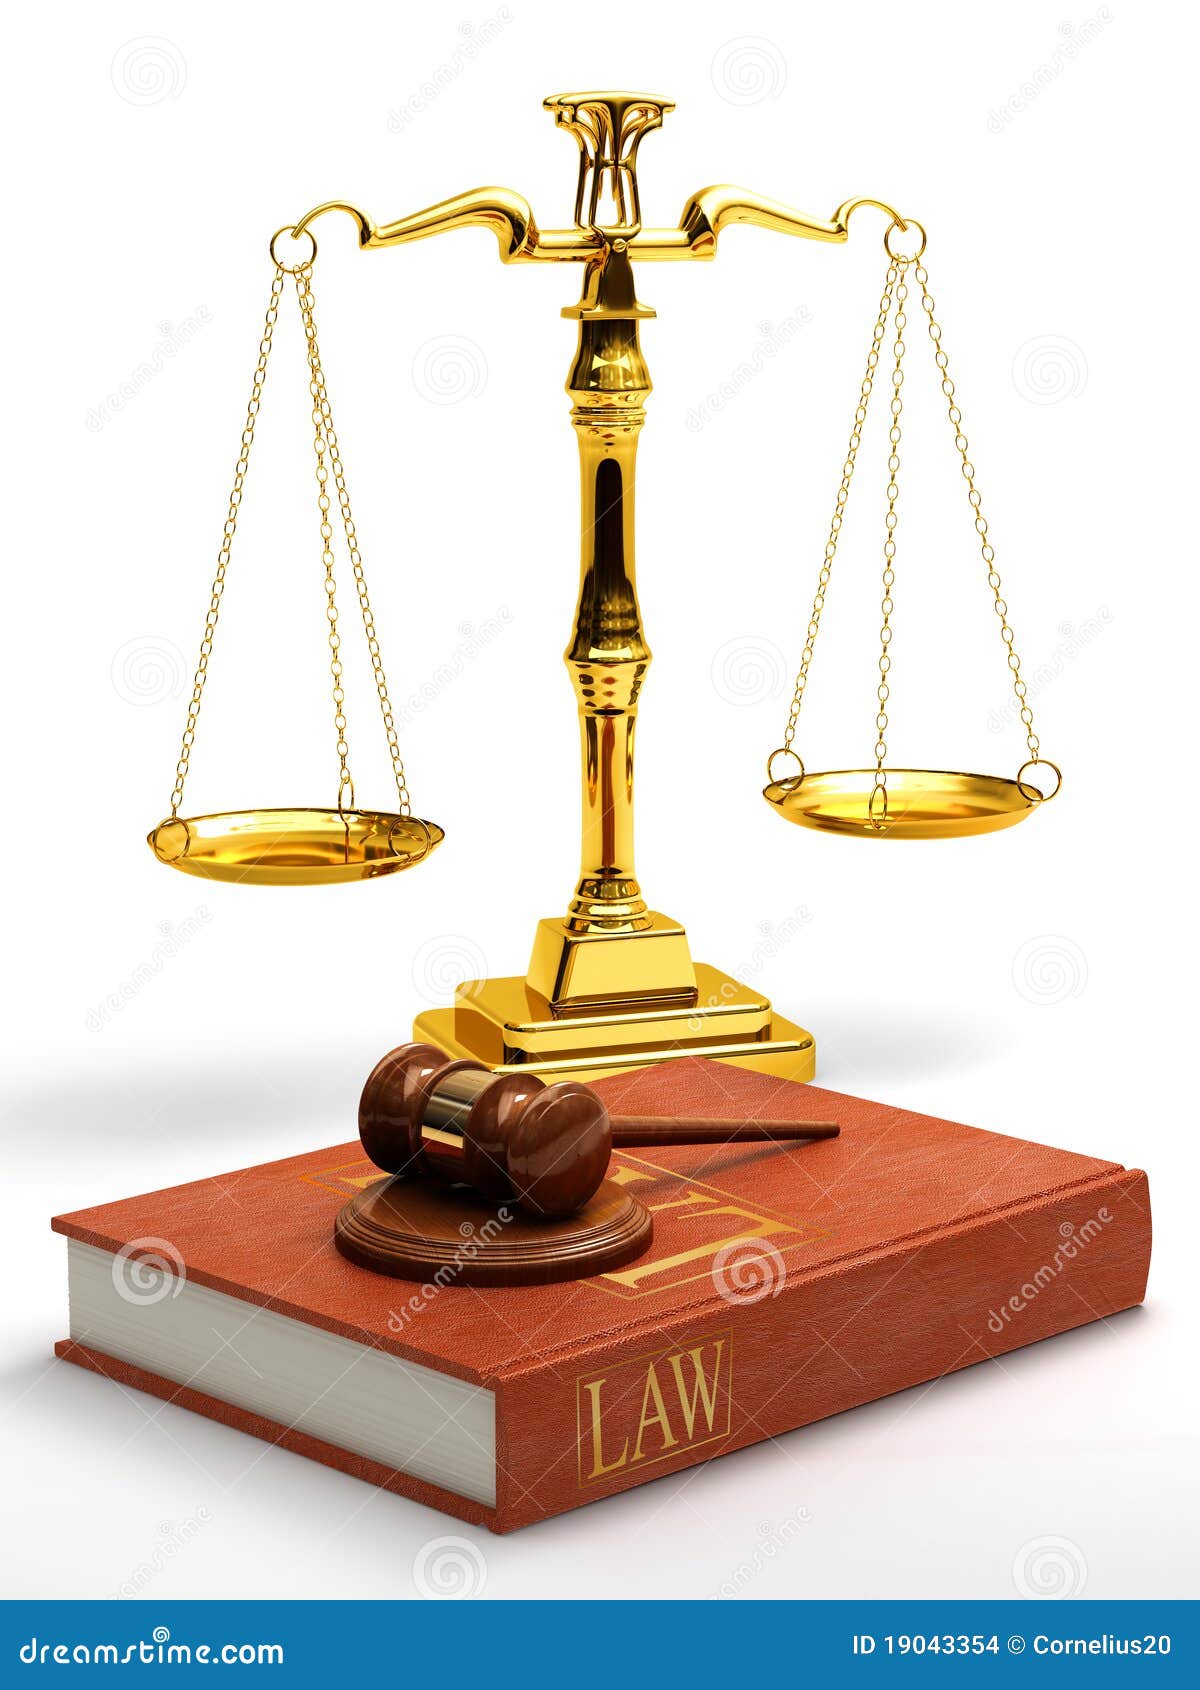 law book clipart - photo #31